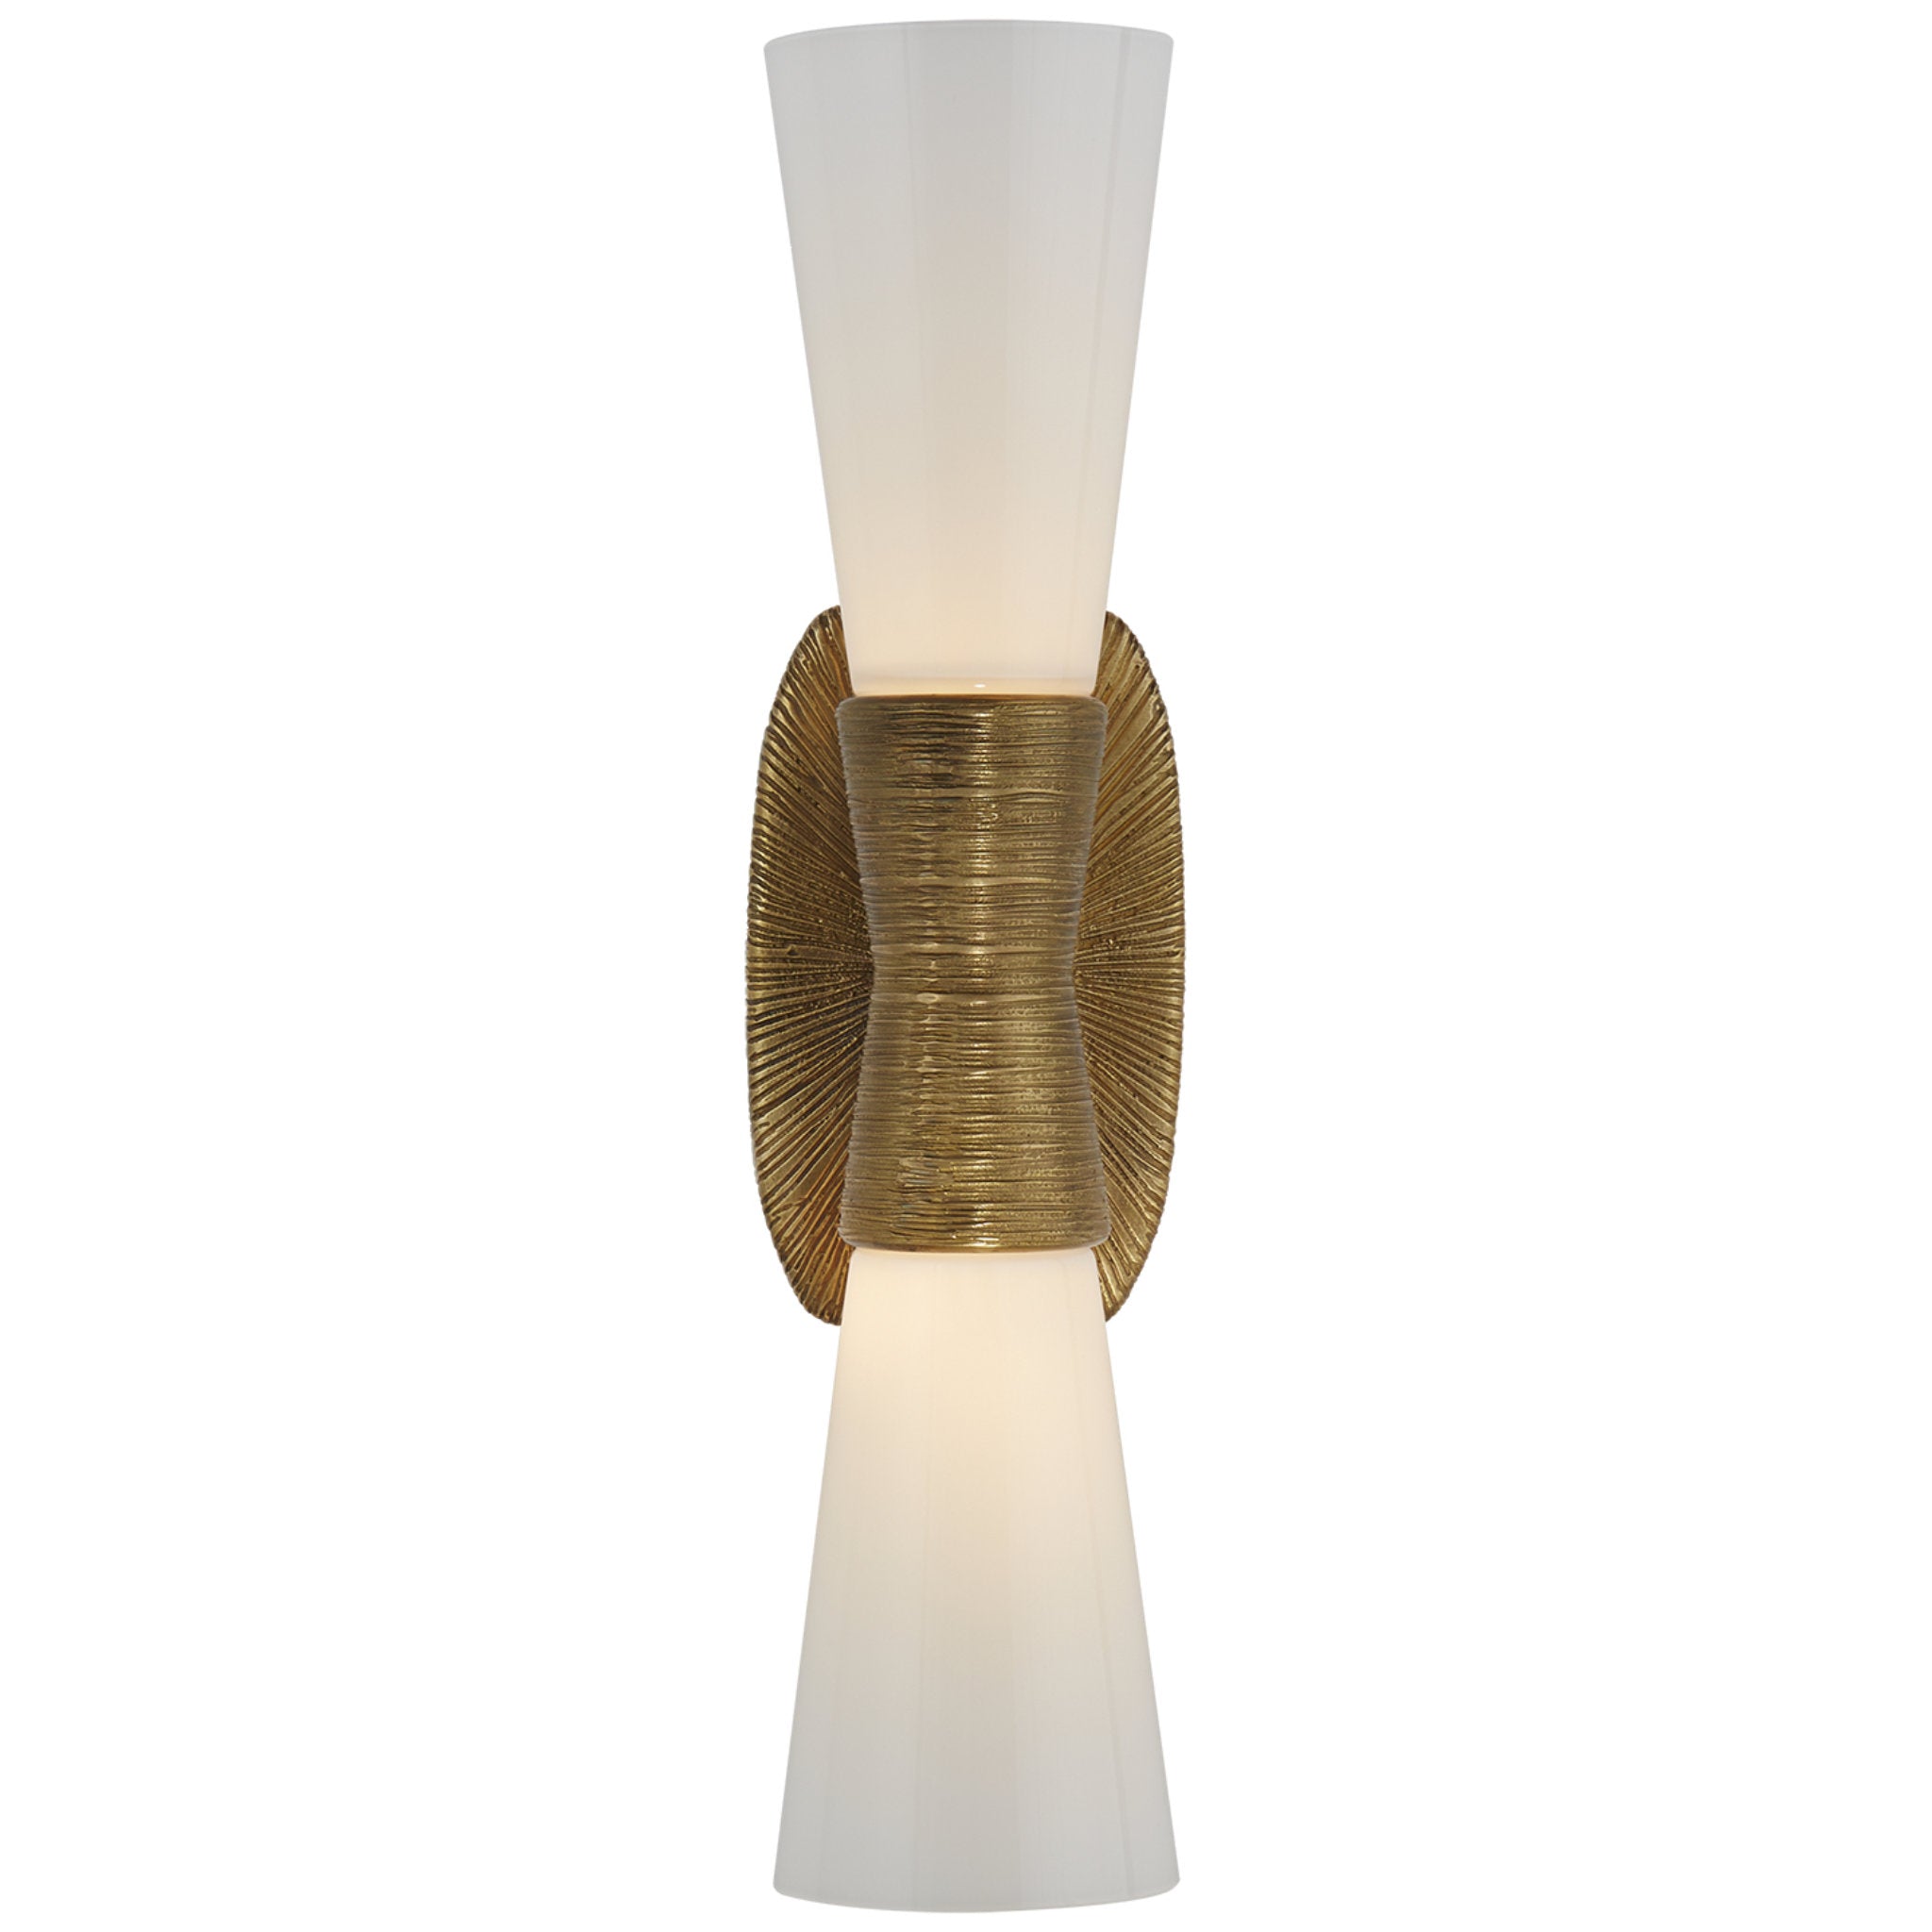 Kelly Wearstler Utopia Small Double Bath Sconce in Gild with White Glass